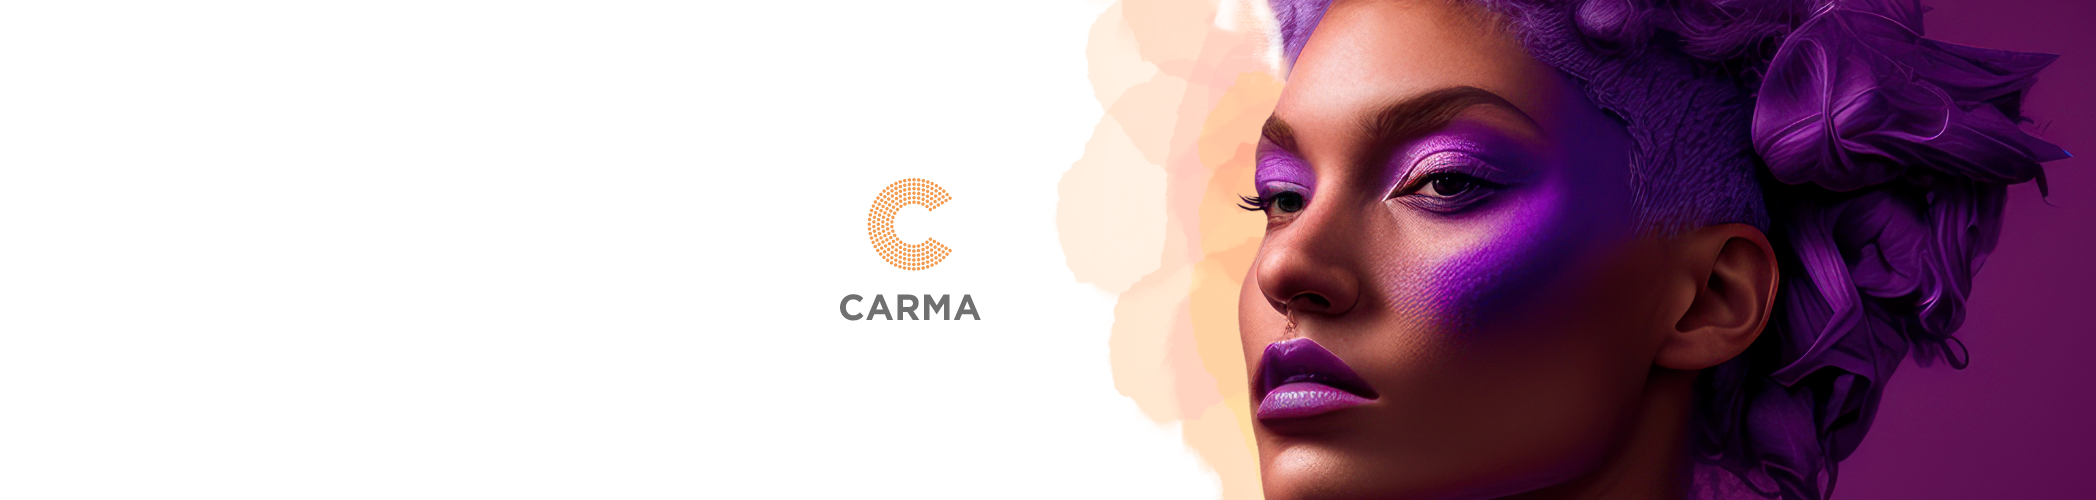 CARMA announces acquisition of mmi Analytics, expanding expertise in Beauty, Fashion, and Lifestyle sectors